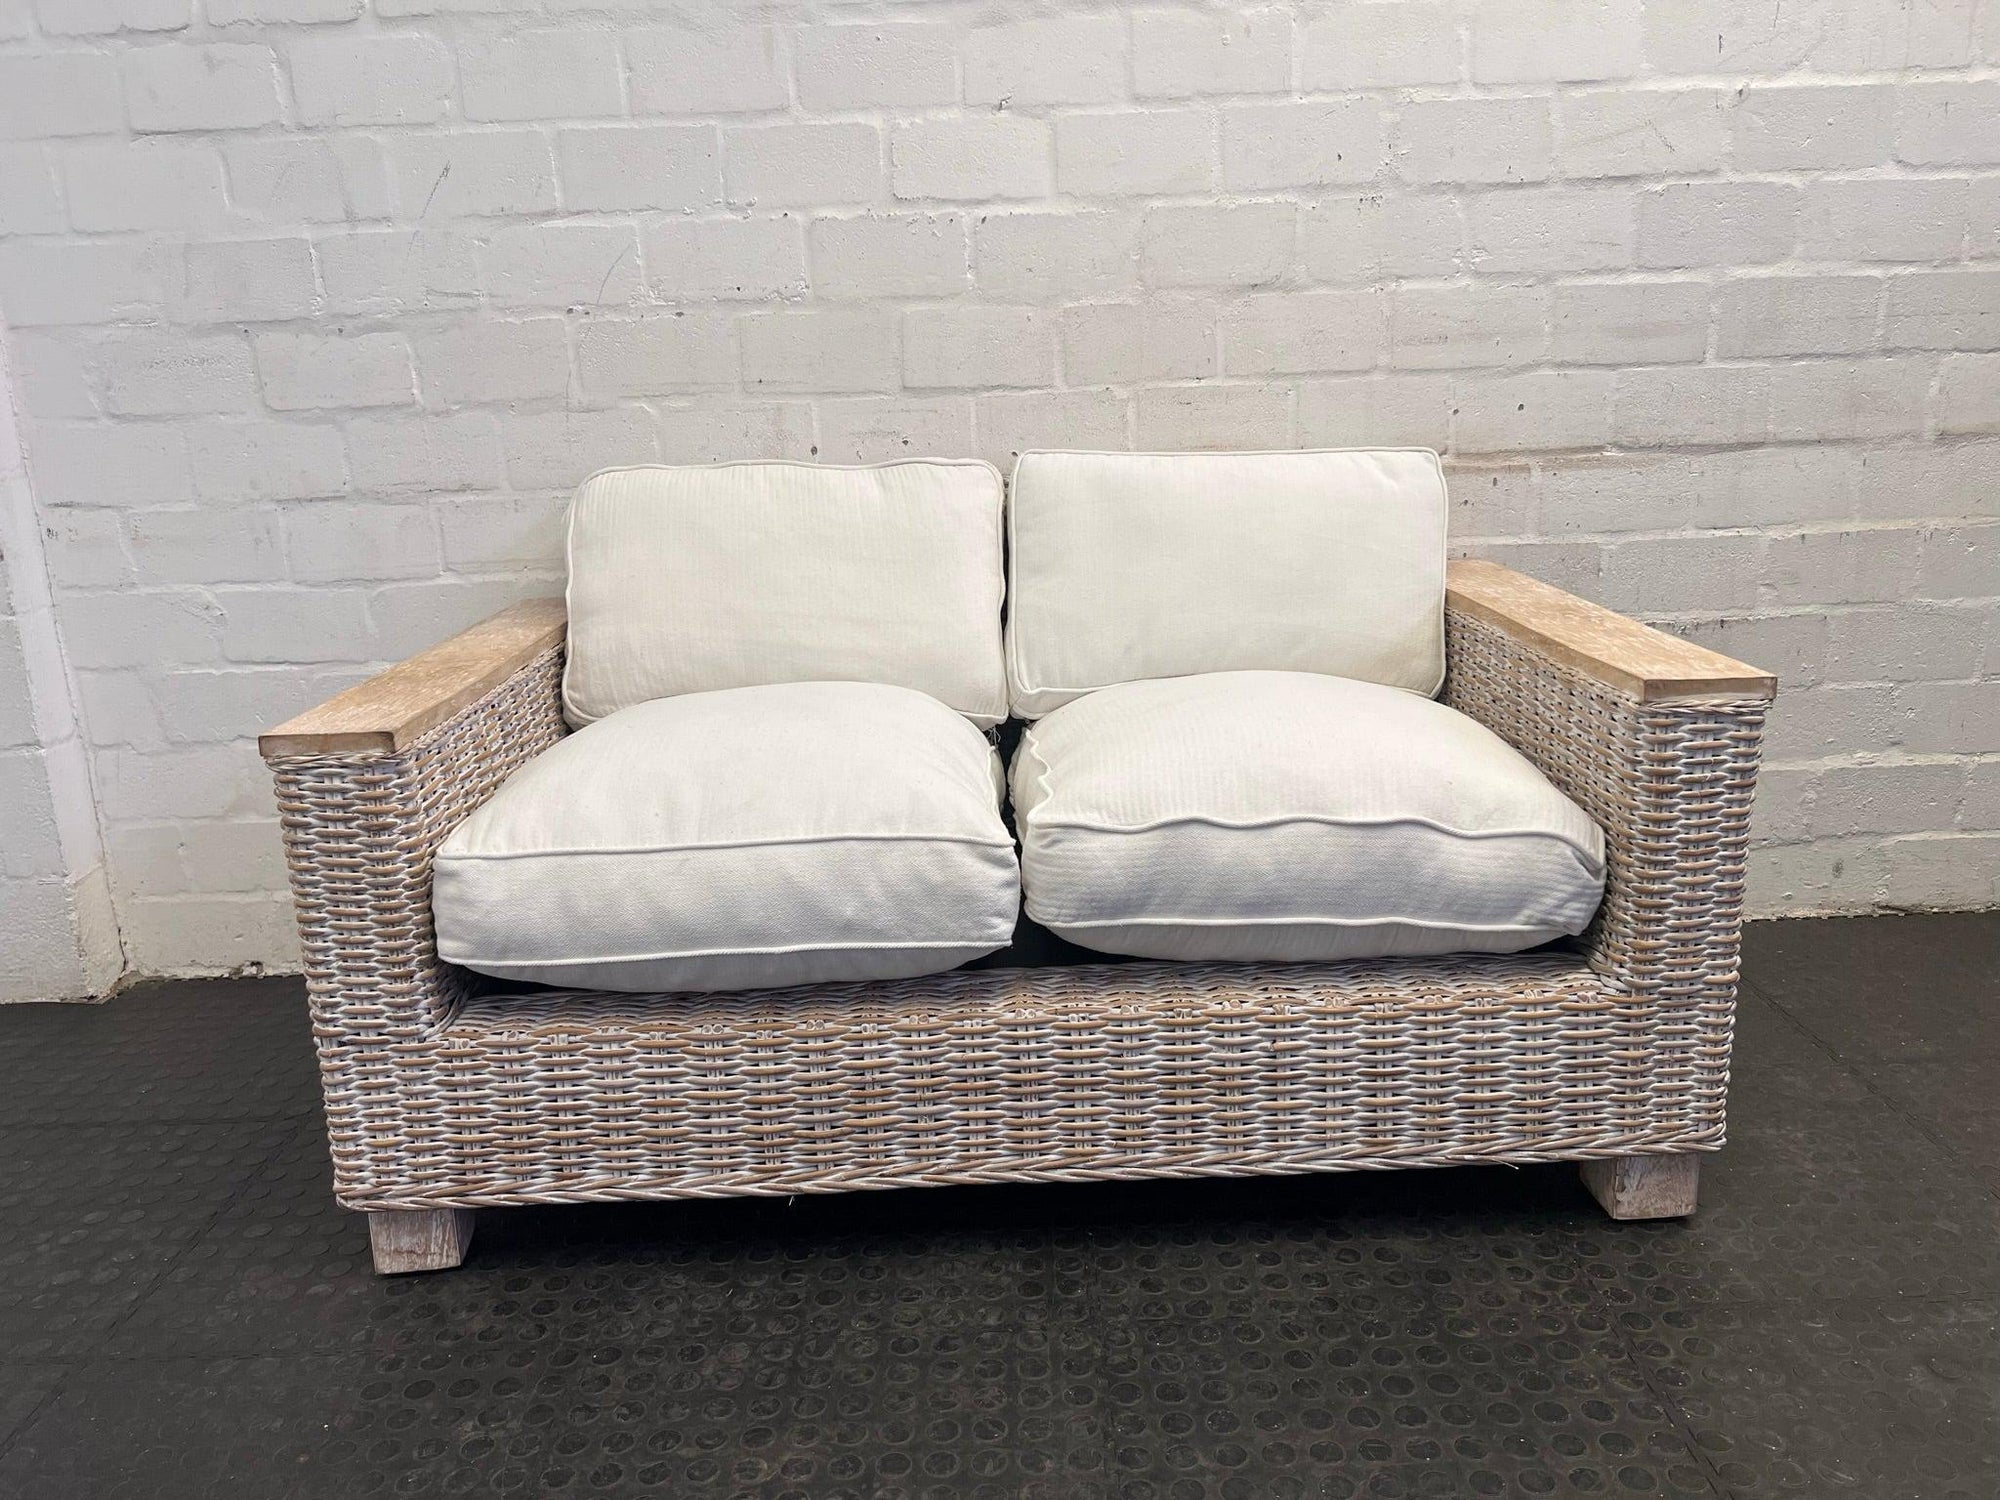 Wicker White Cushioned 2 Seater Patio Couch - REDUCED